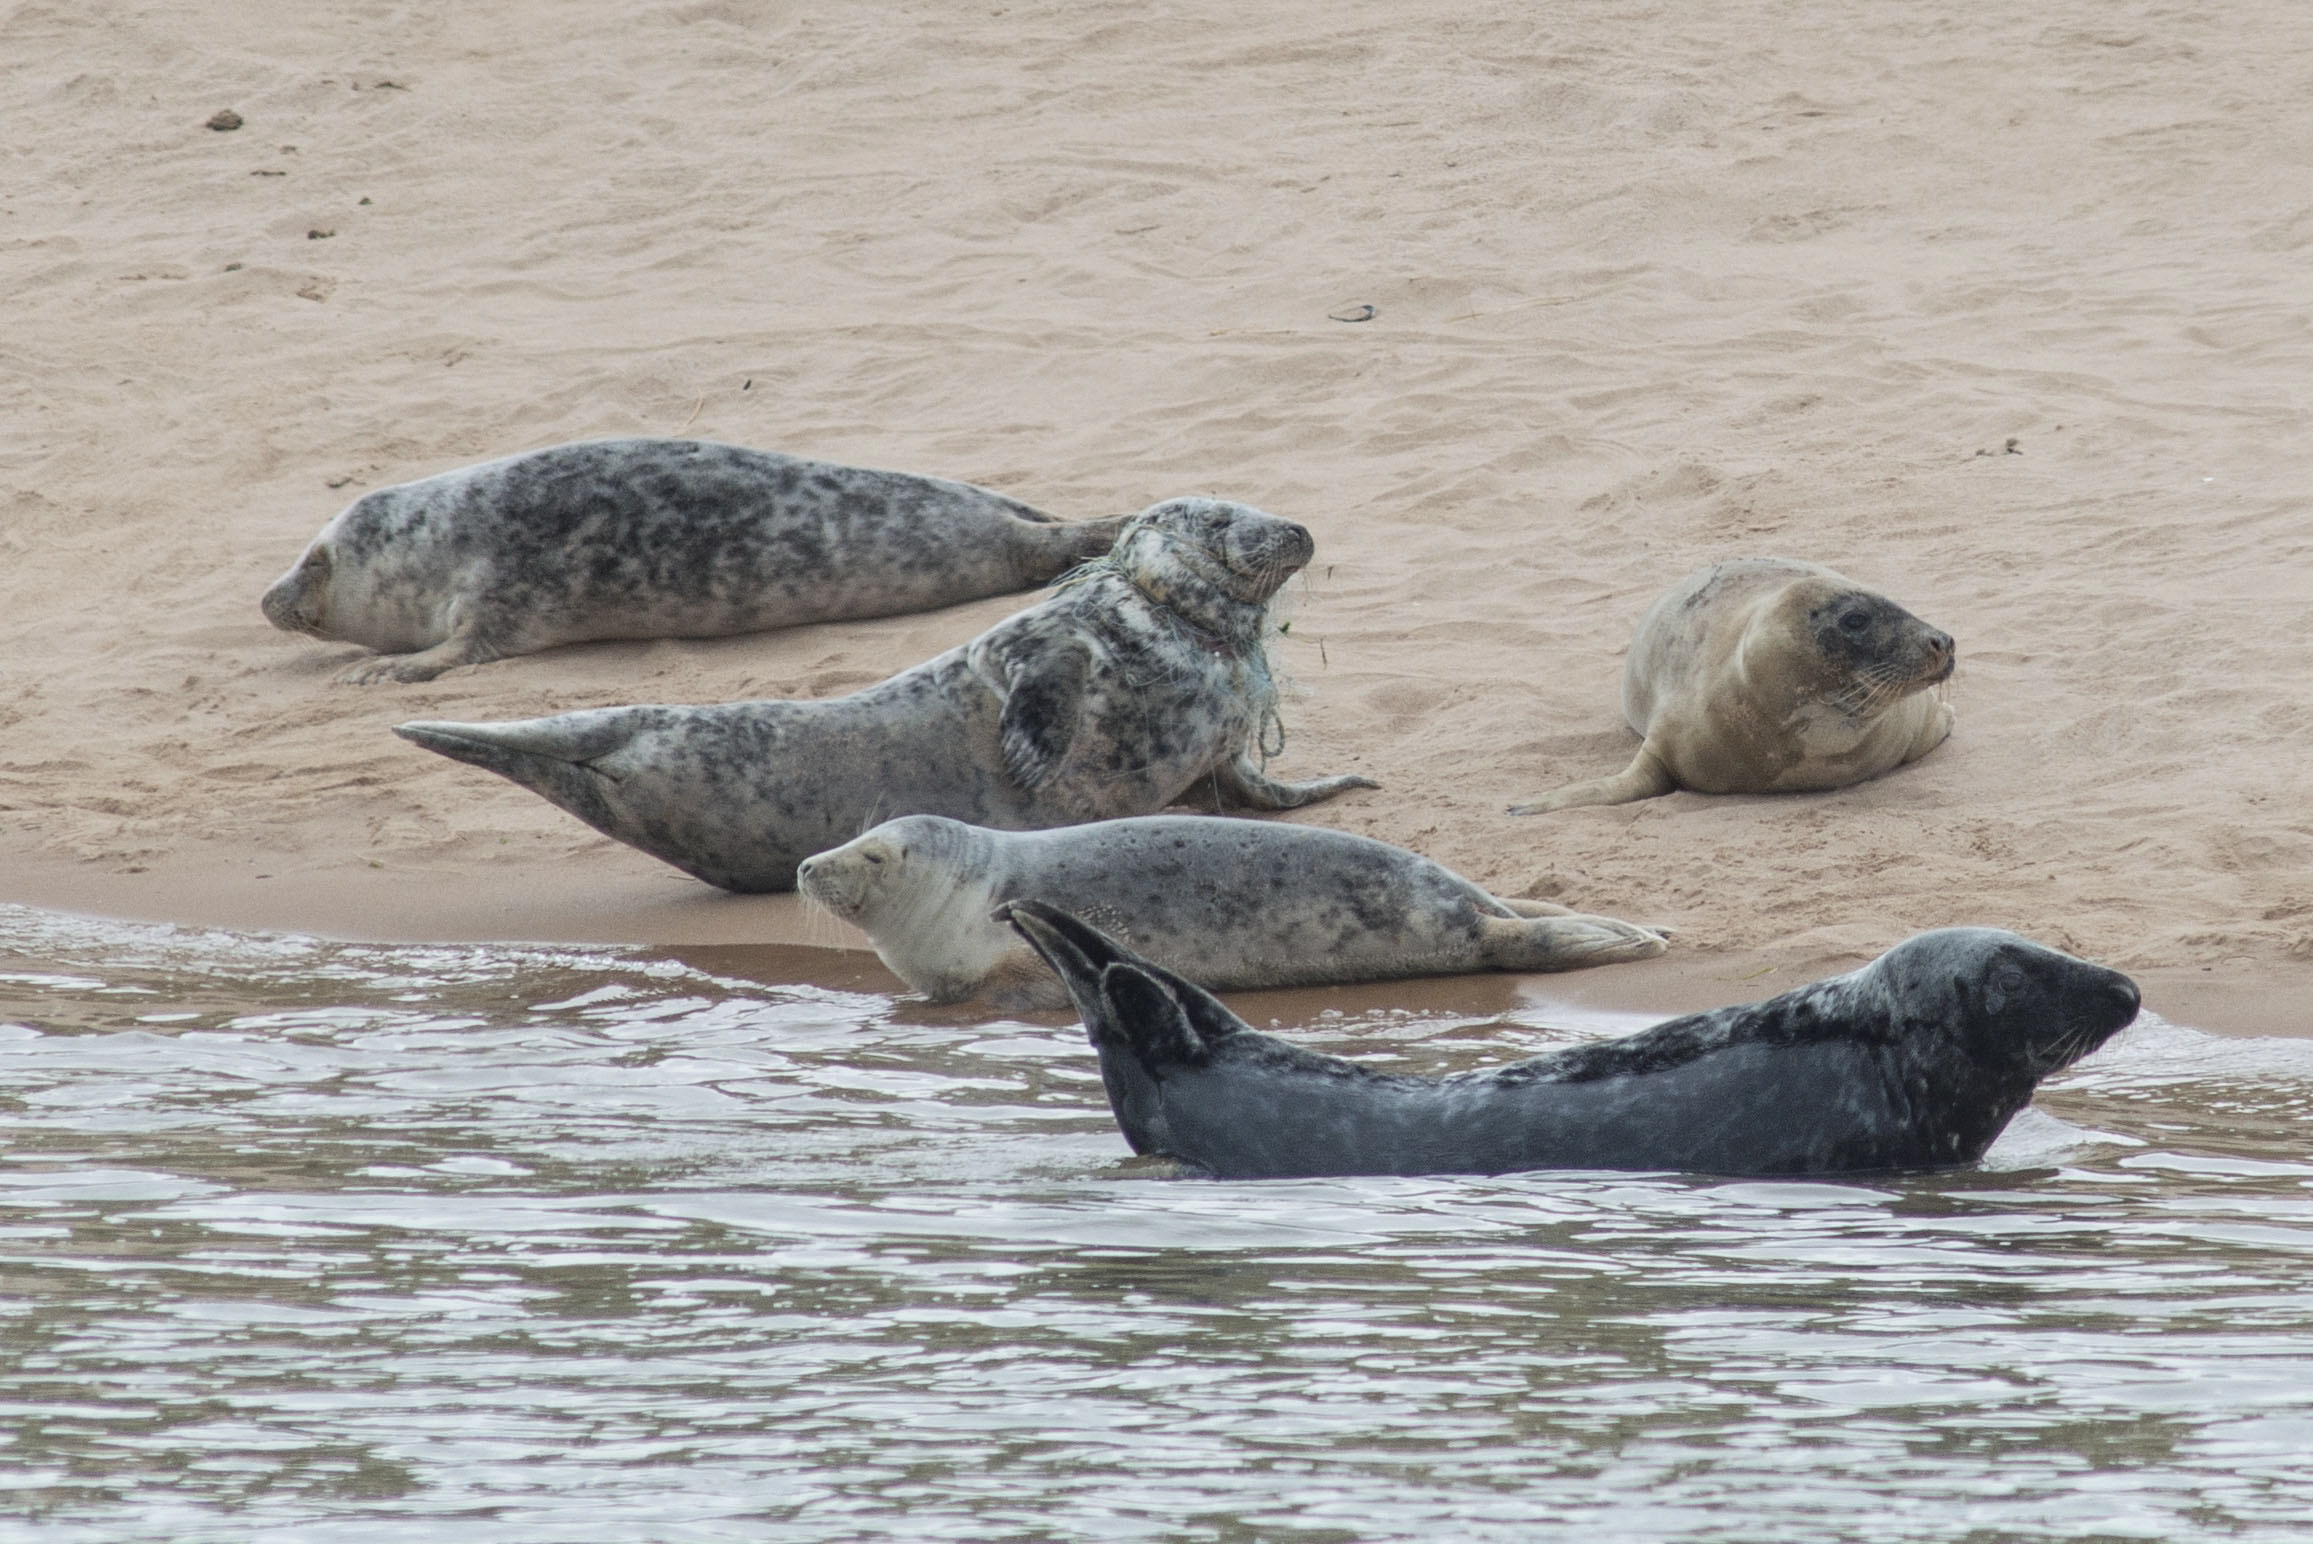 The seal was spotted on the beach at Forvie National Nature Reserve in Newburgh, Aberdeenshire. Picture by Paul Glendell